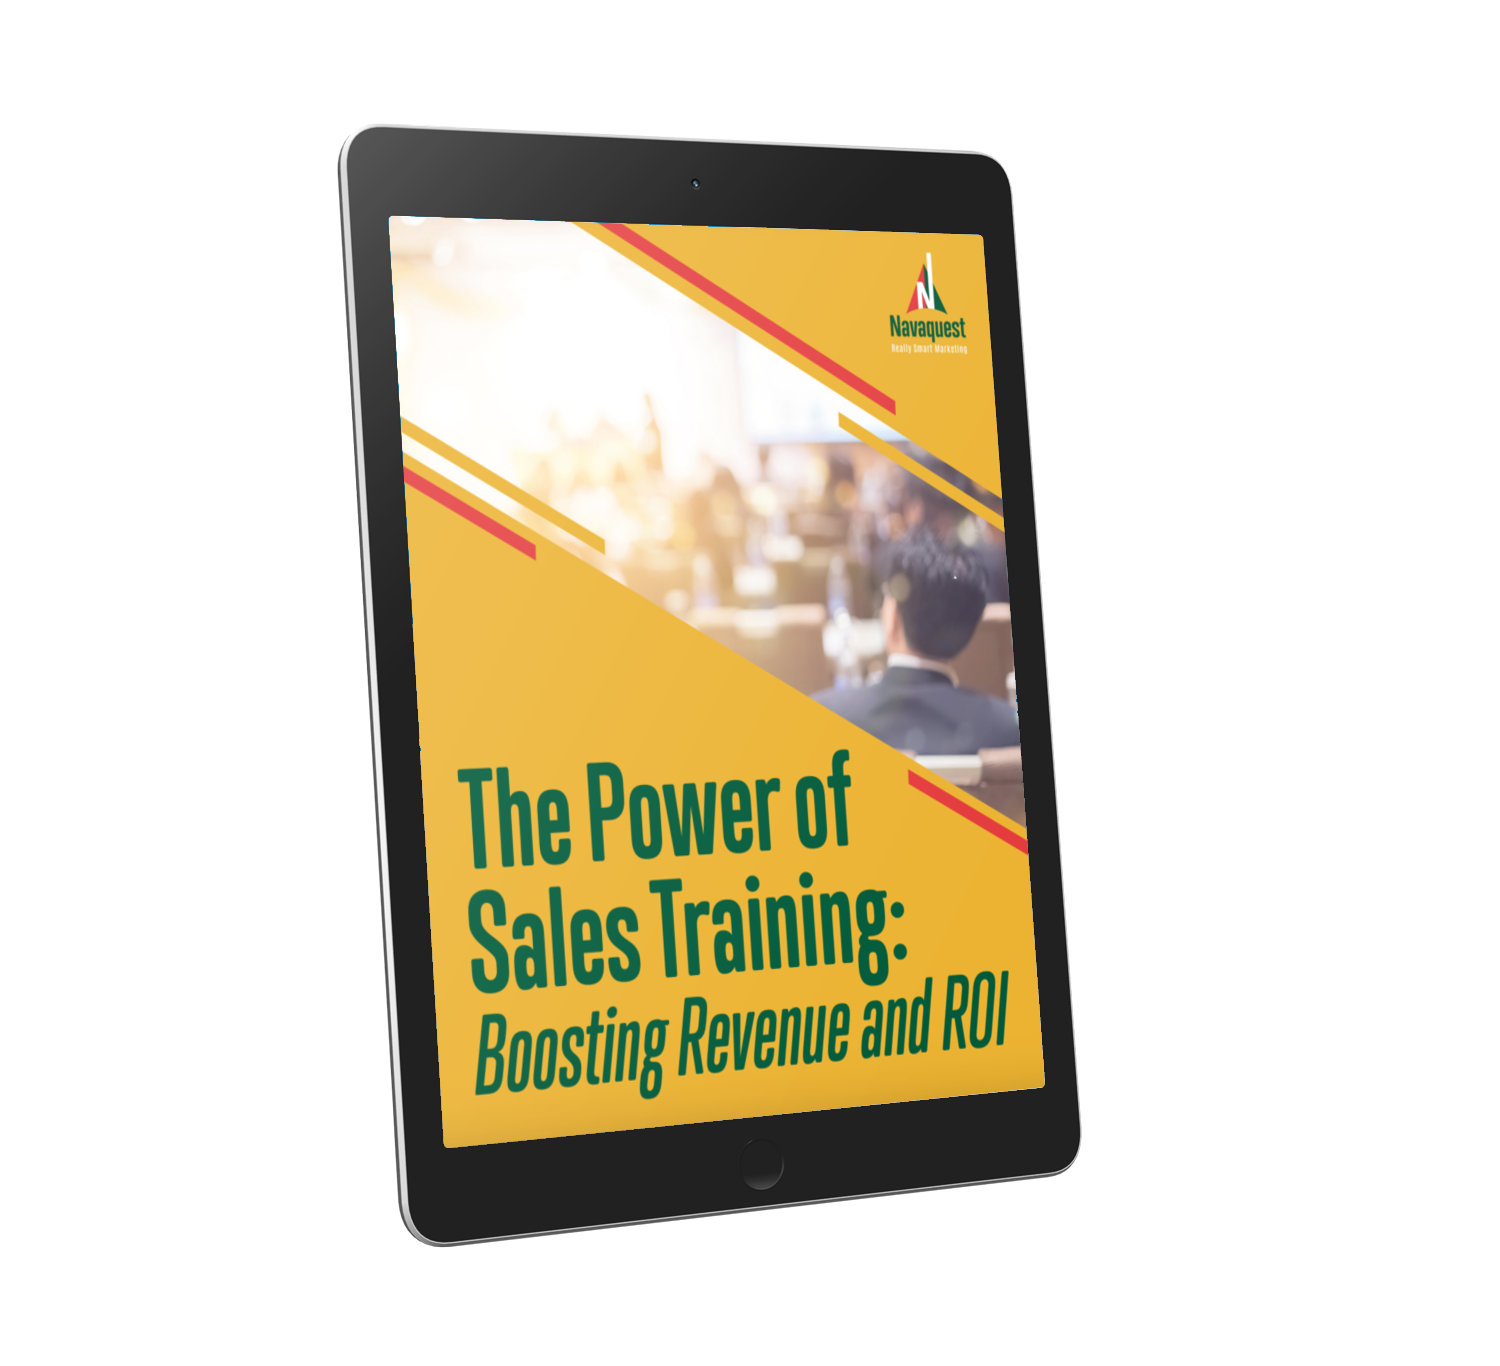 The Power of Sales Training: Boosting Revenue and ROI